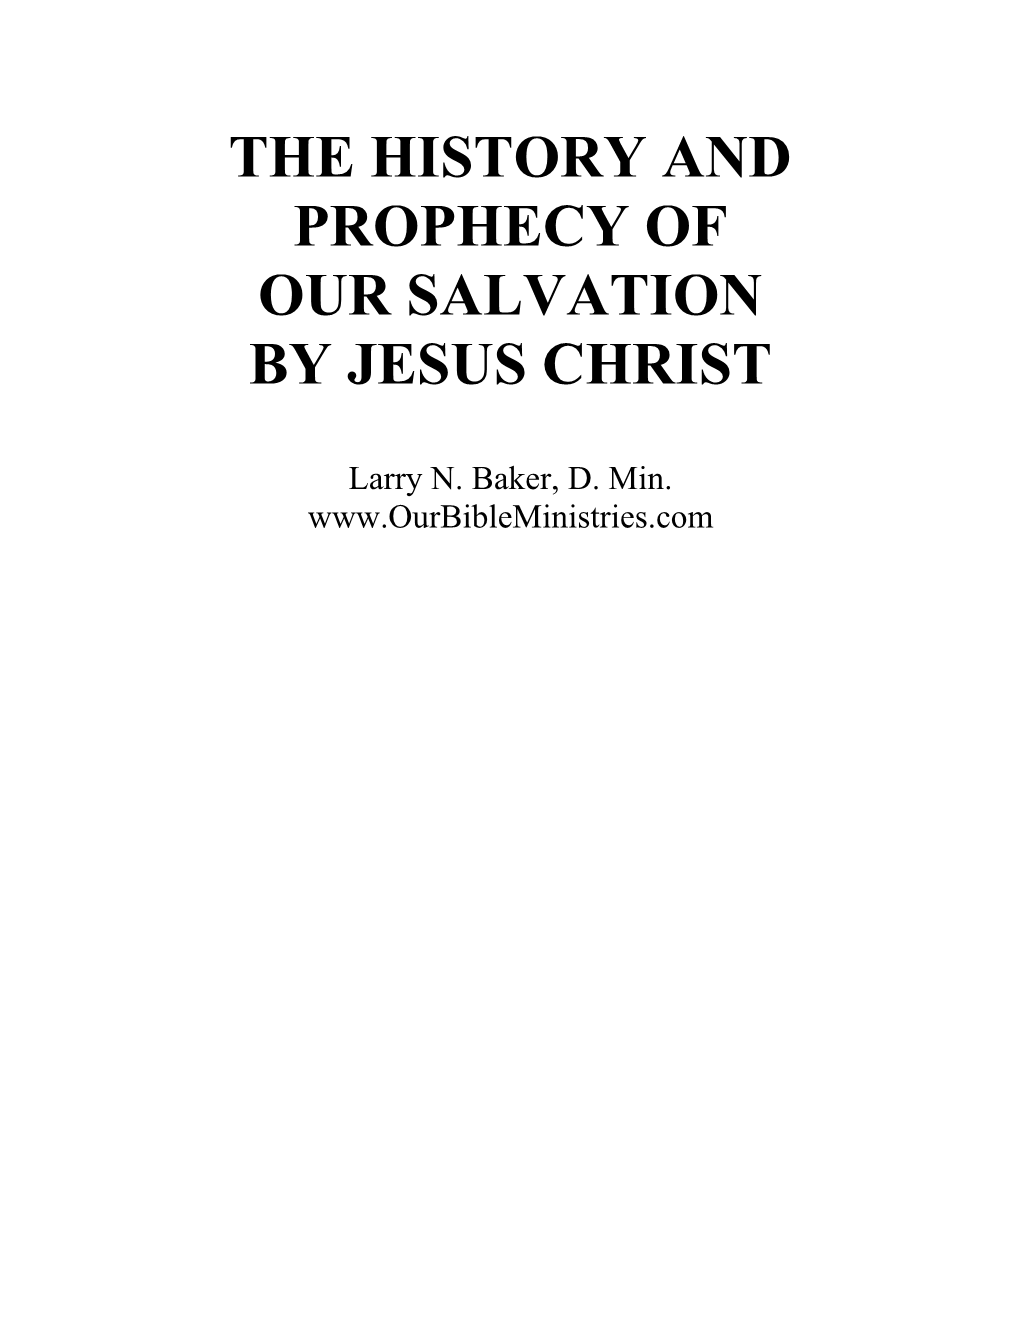 The History and Prophecy of Our Salvation by Jesus Christ